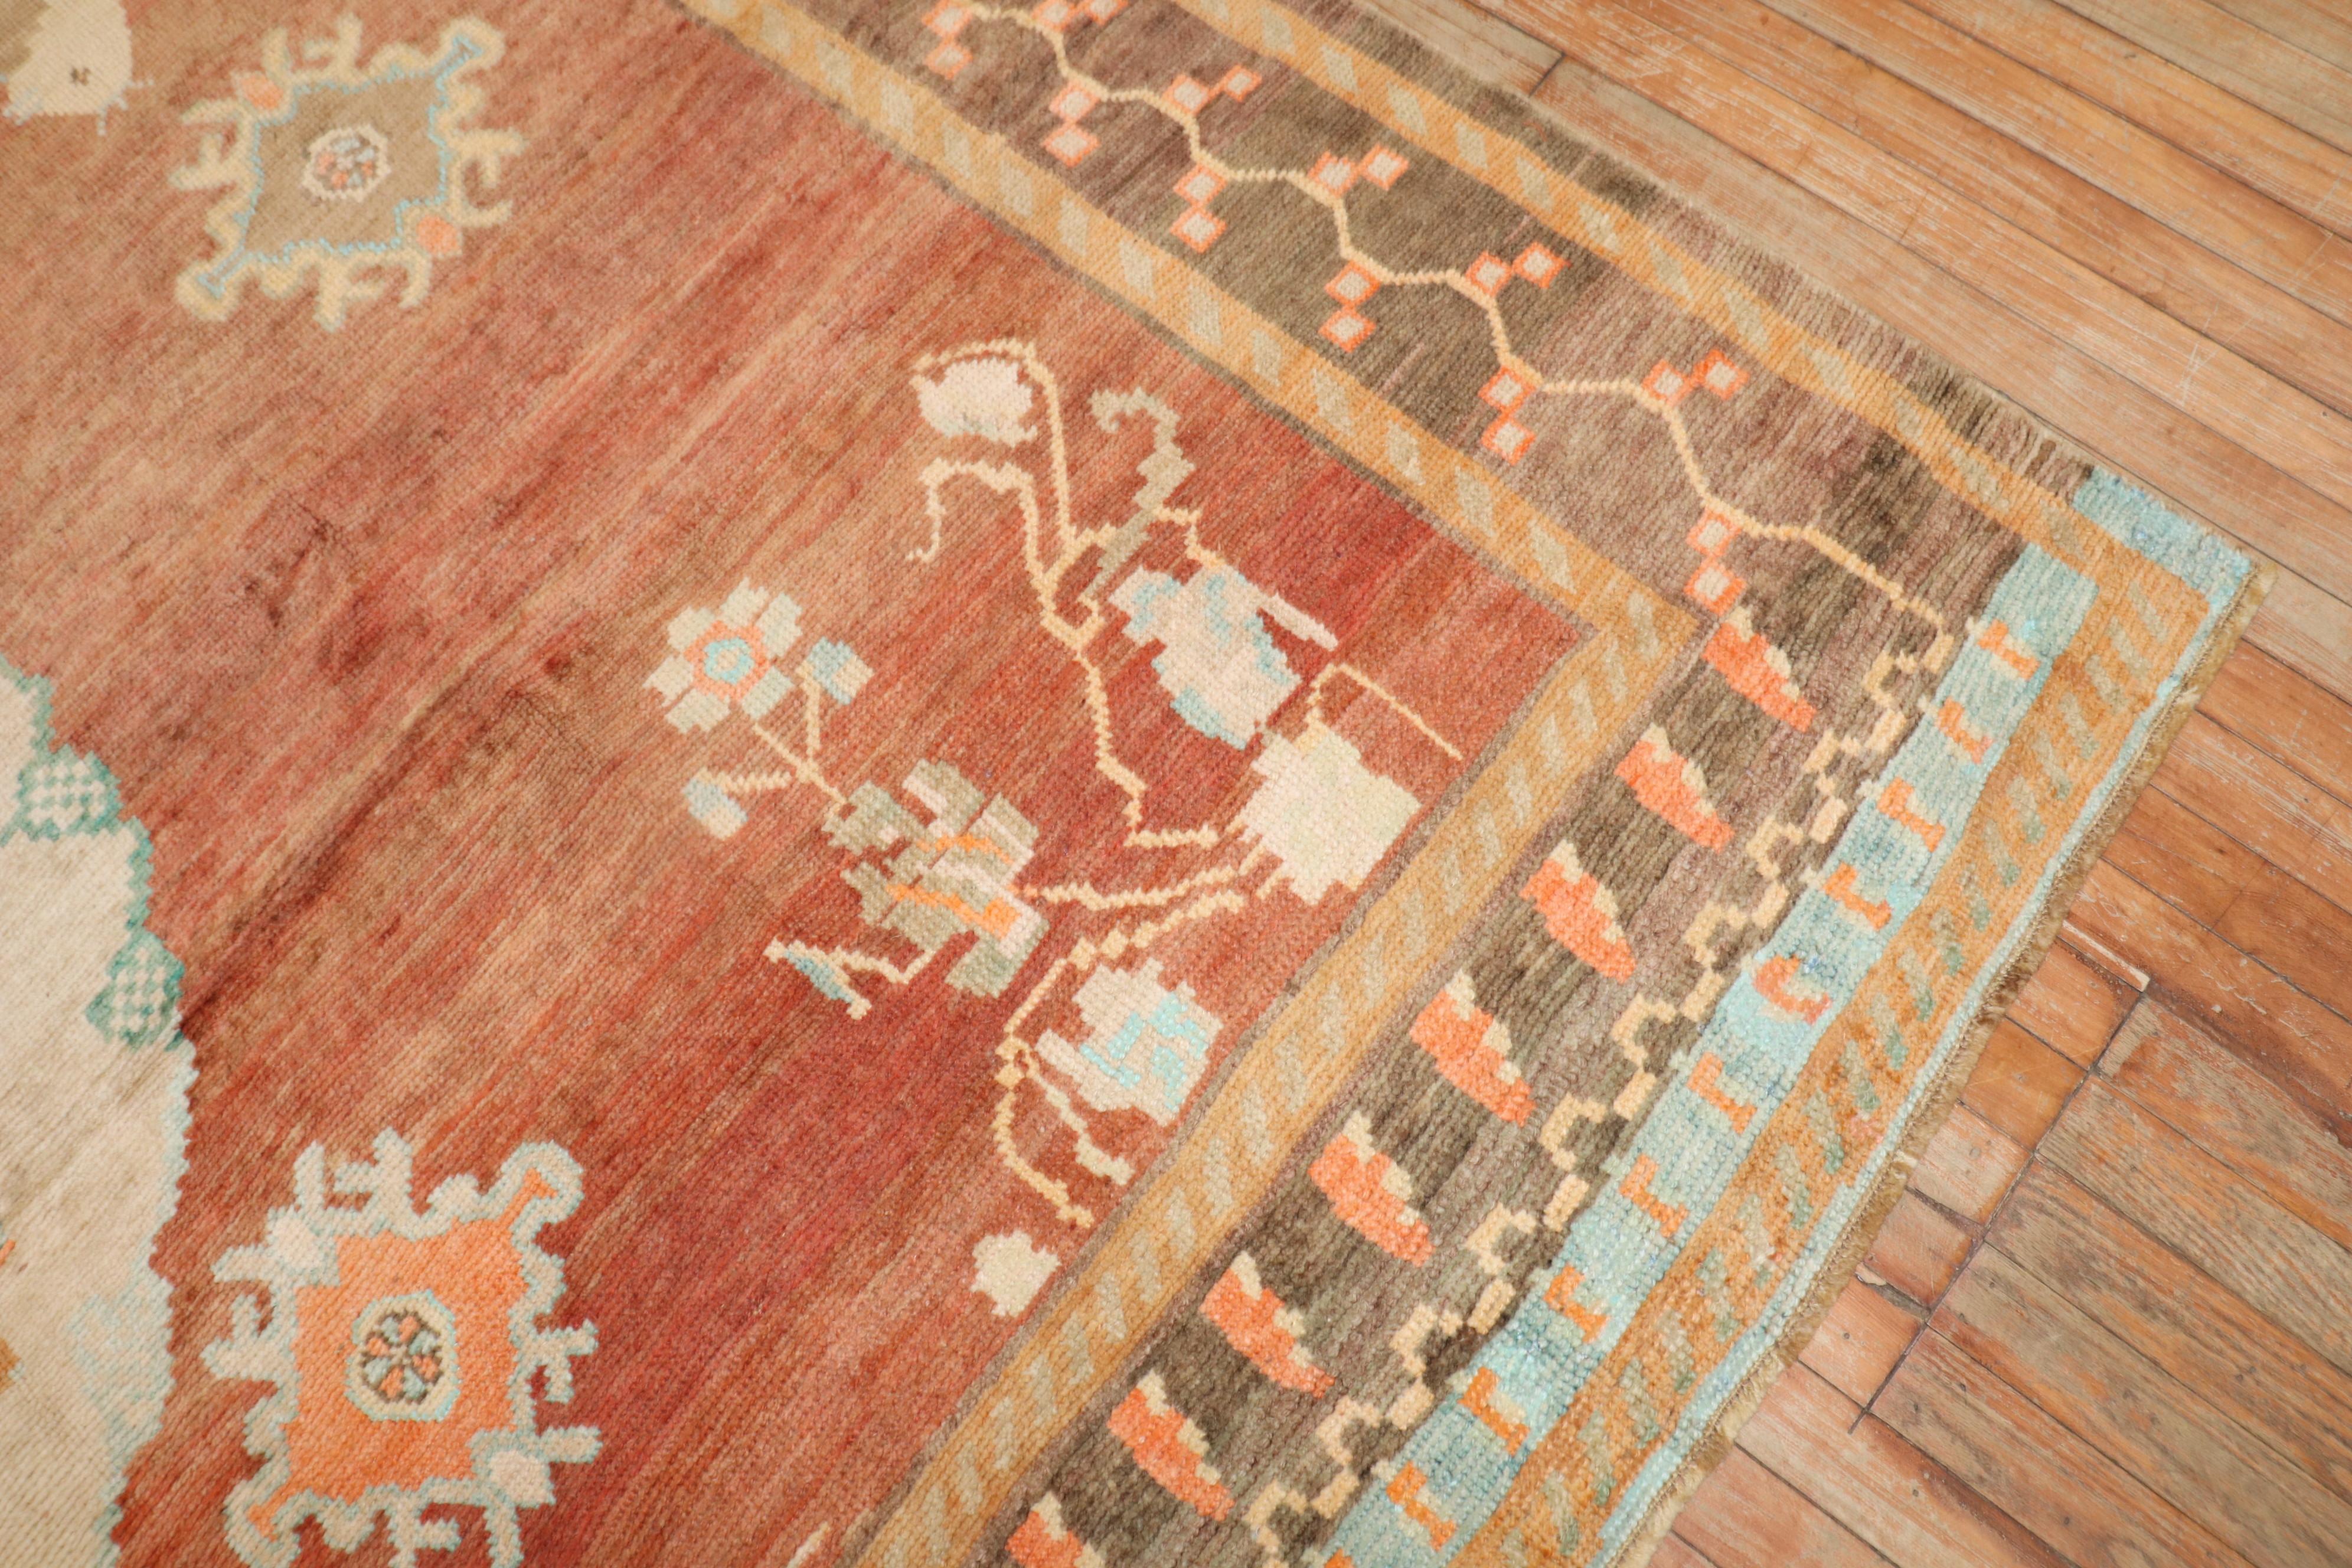 An early 20th-century Turkish Rug featuring 2 large pigeons on an apricot field

Size 9' 5